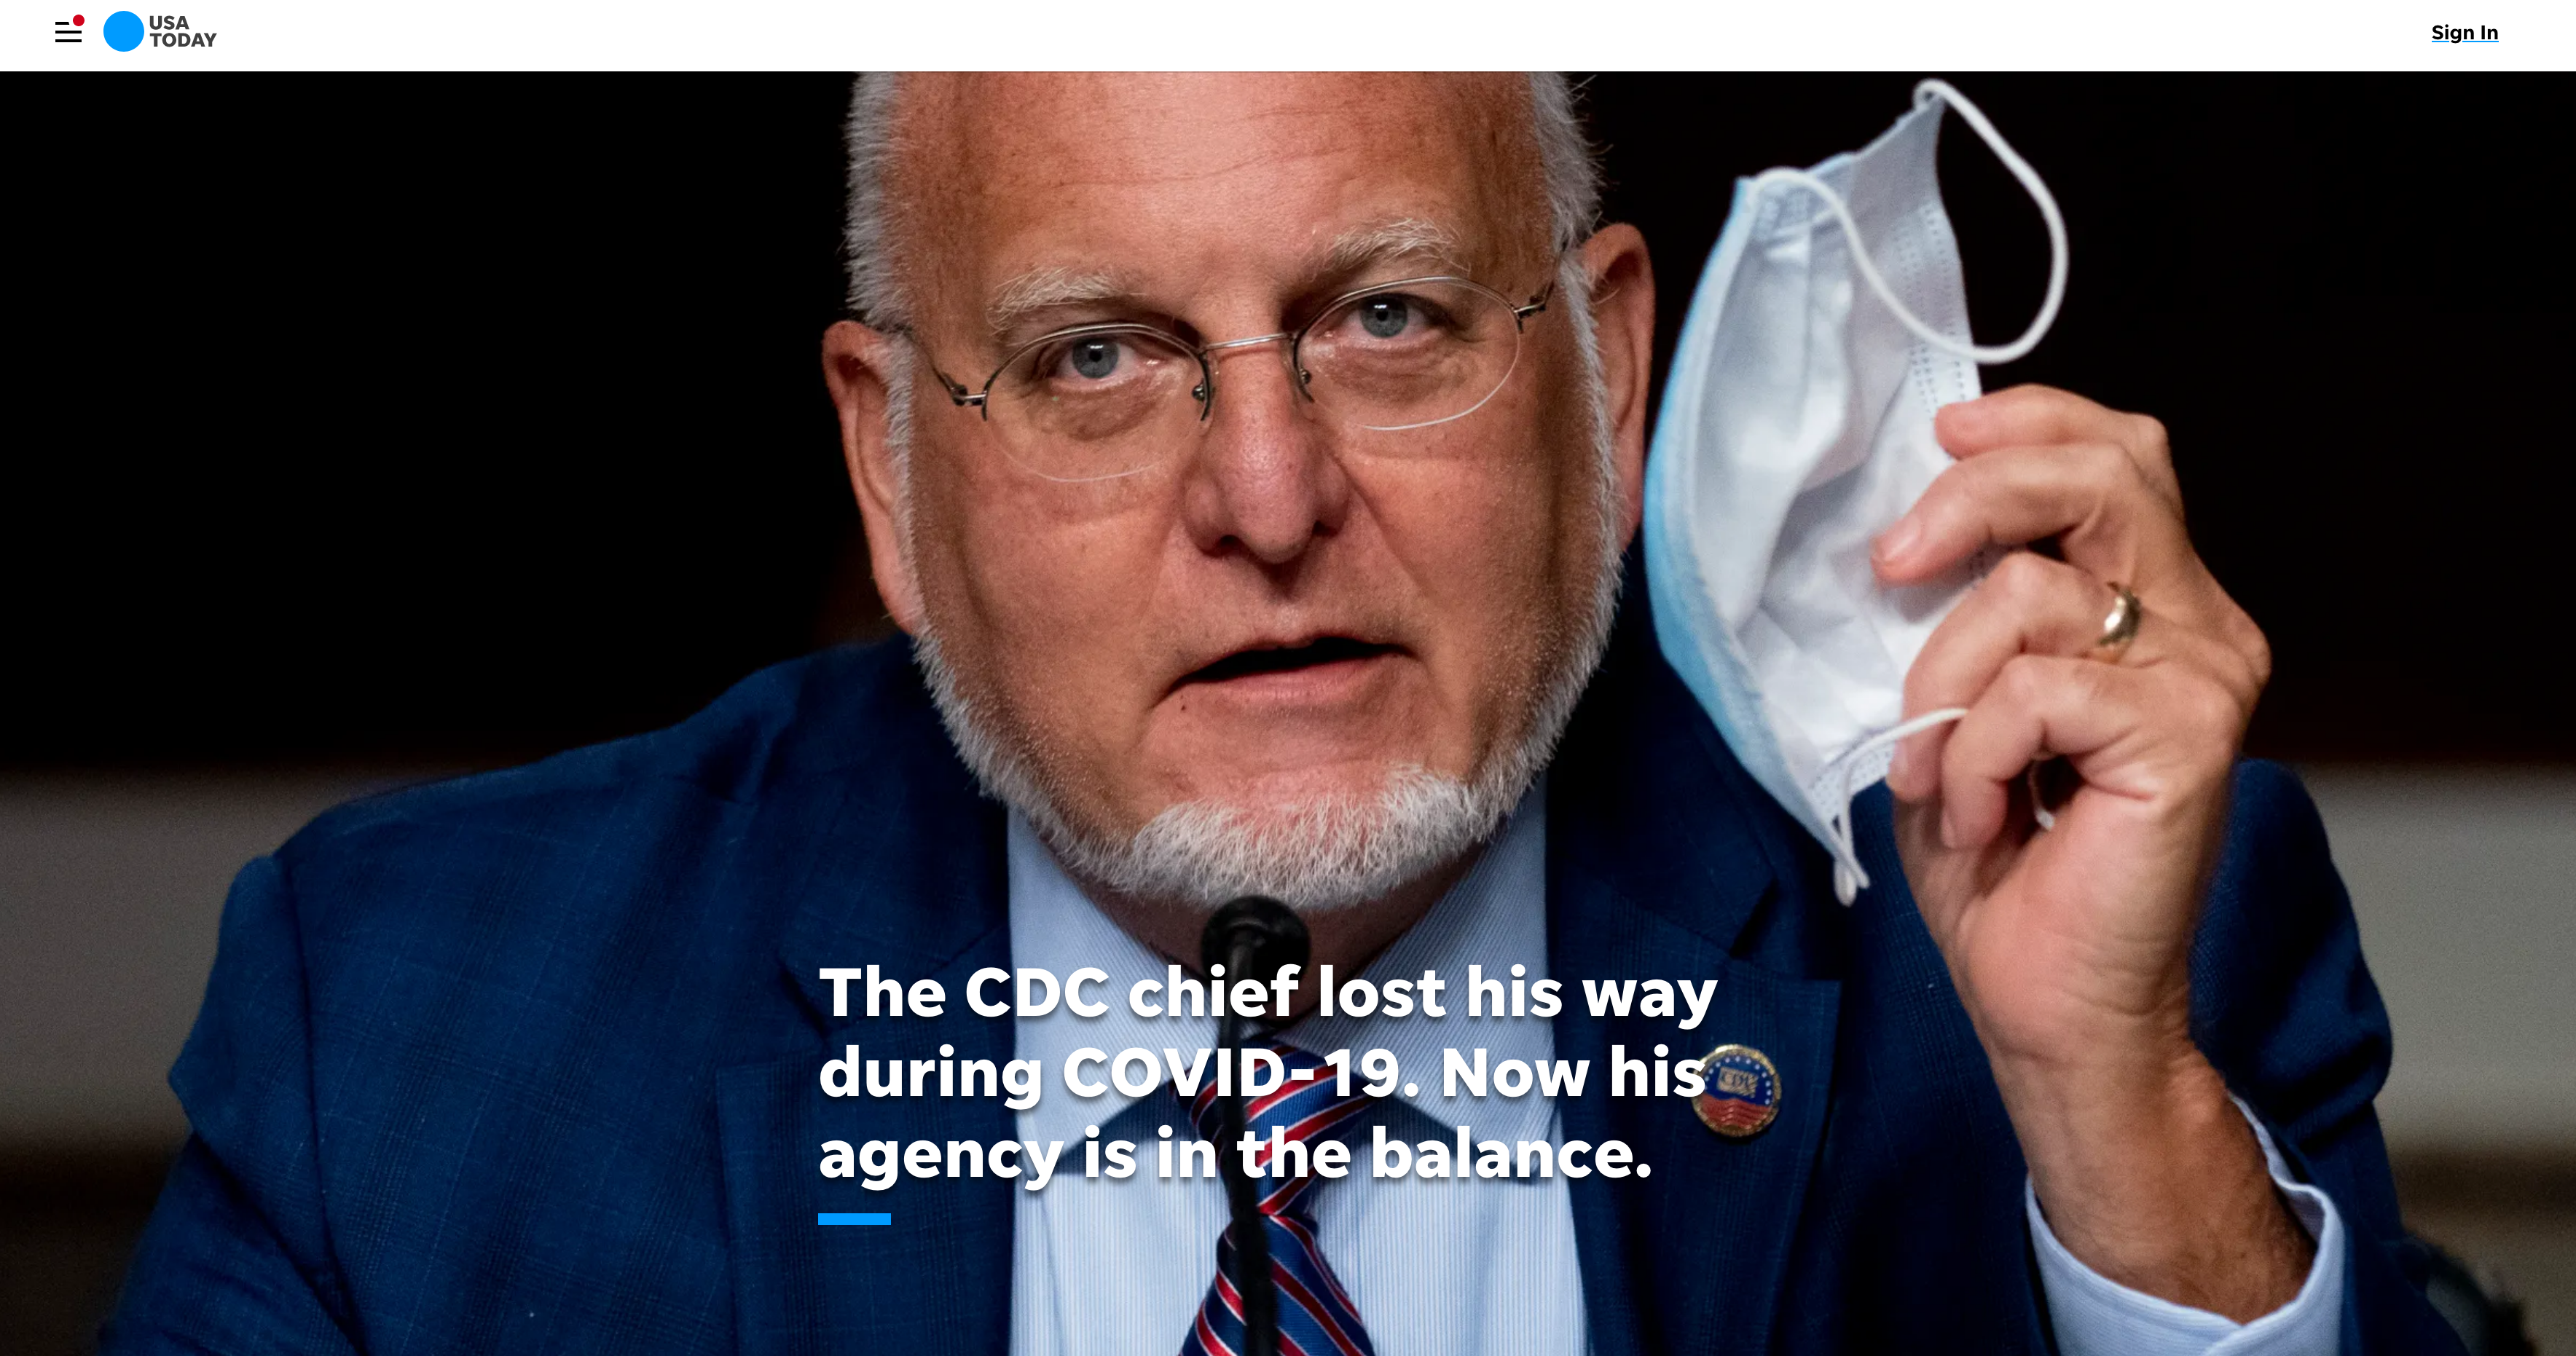 The CDC chief lost his way during COVID-19. Now his agency is in the balance.